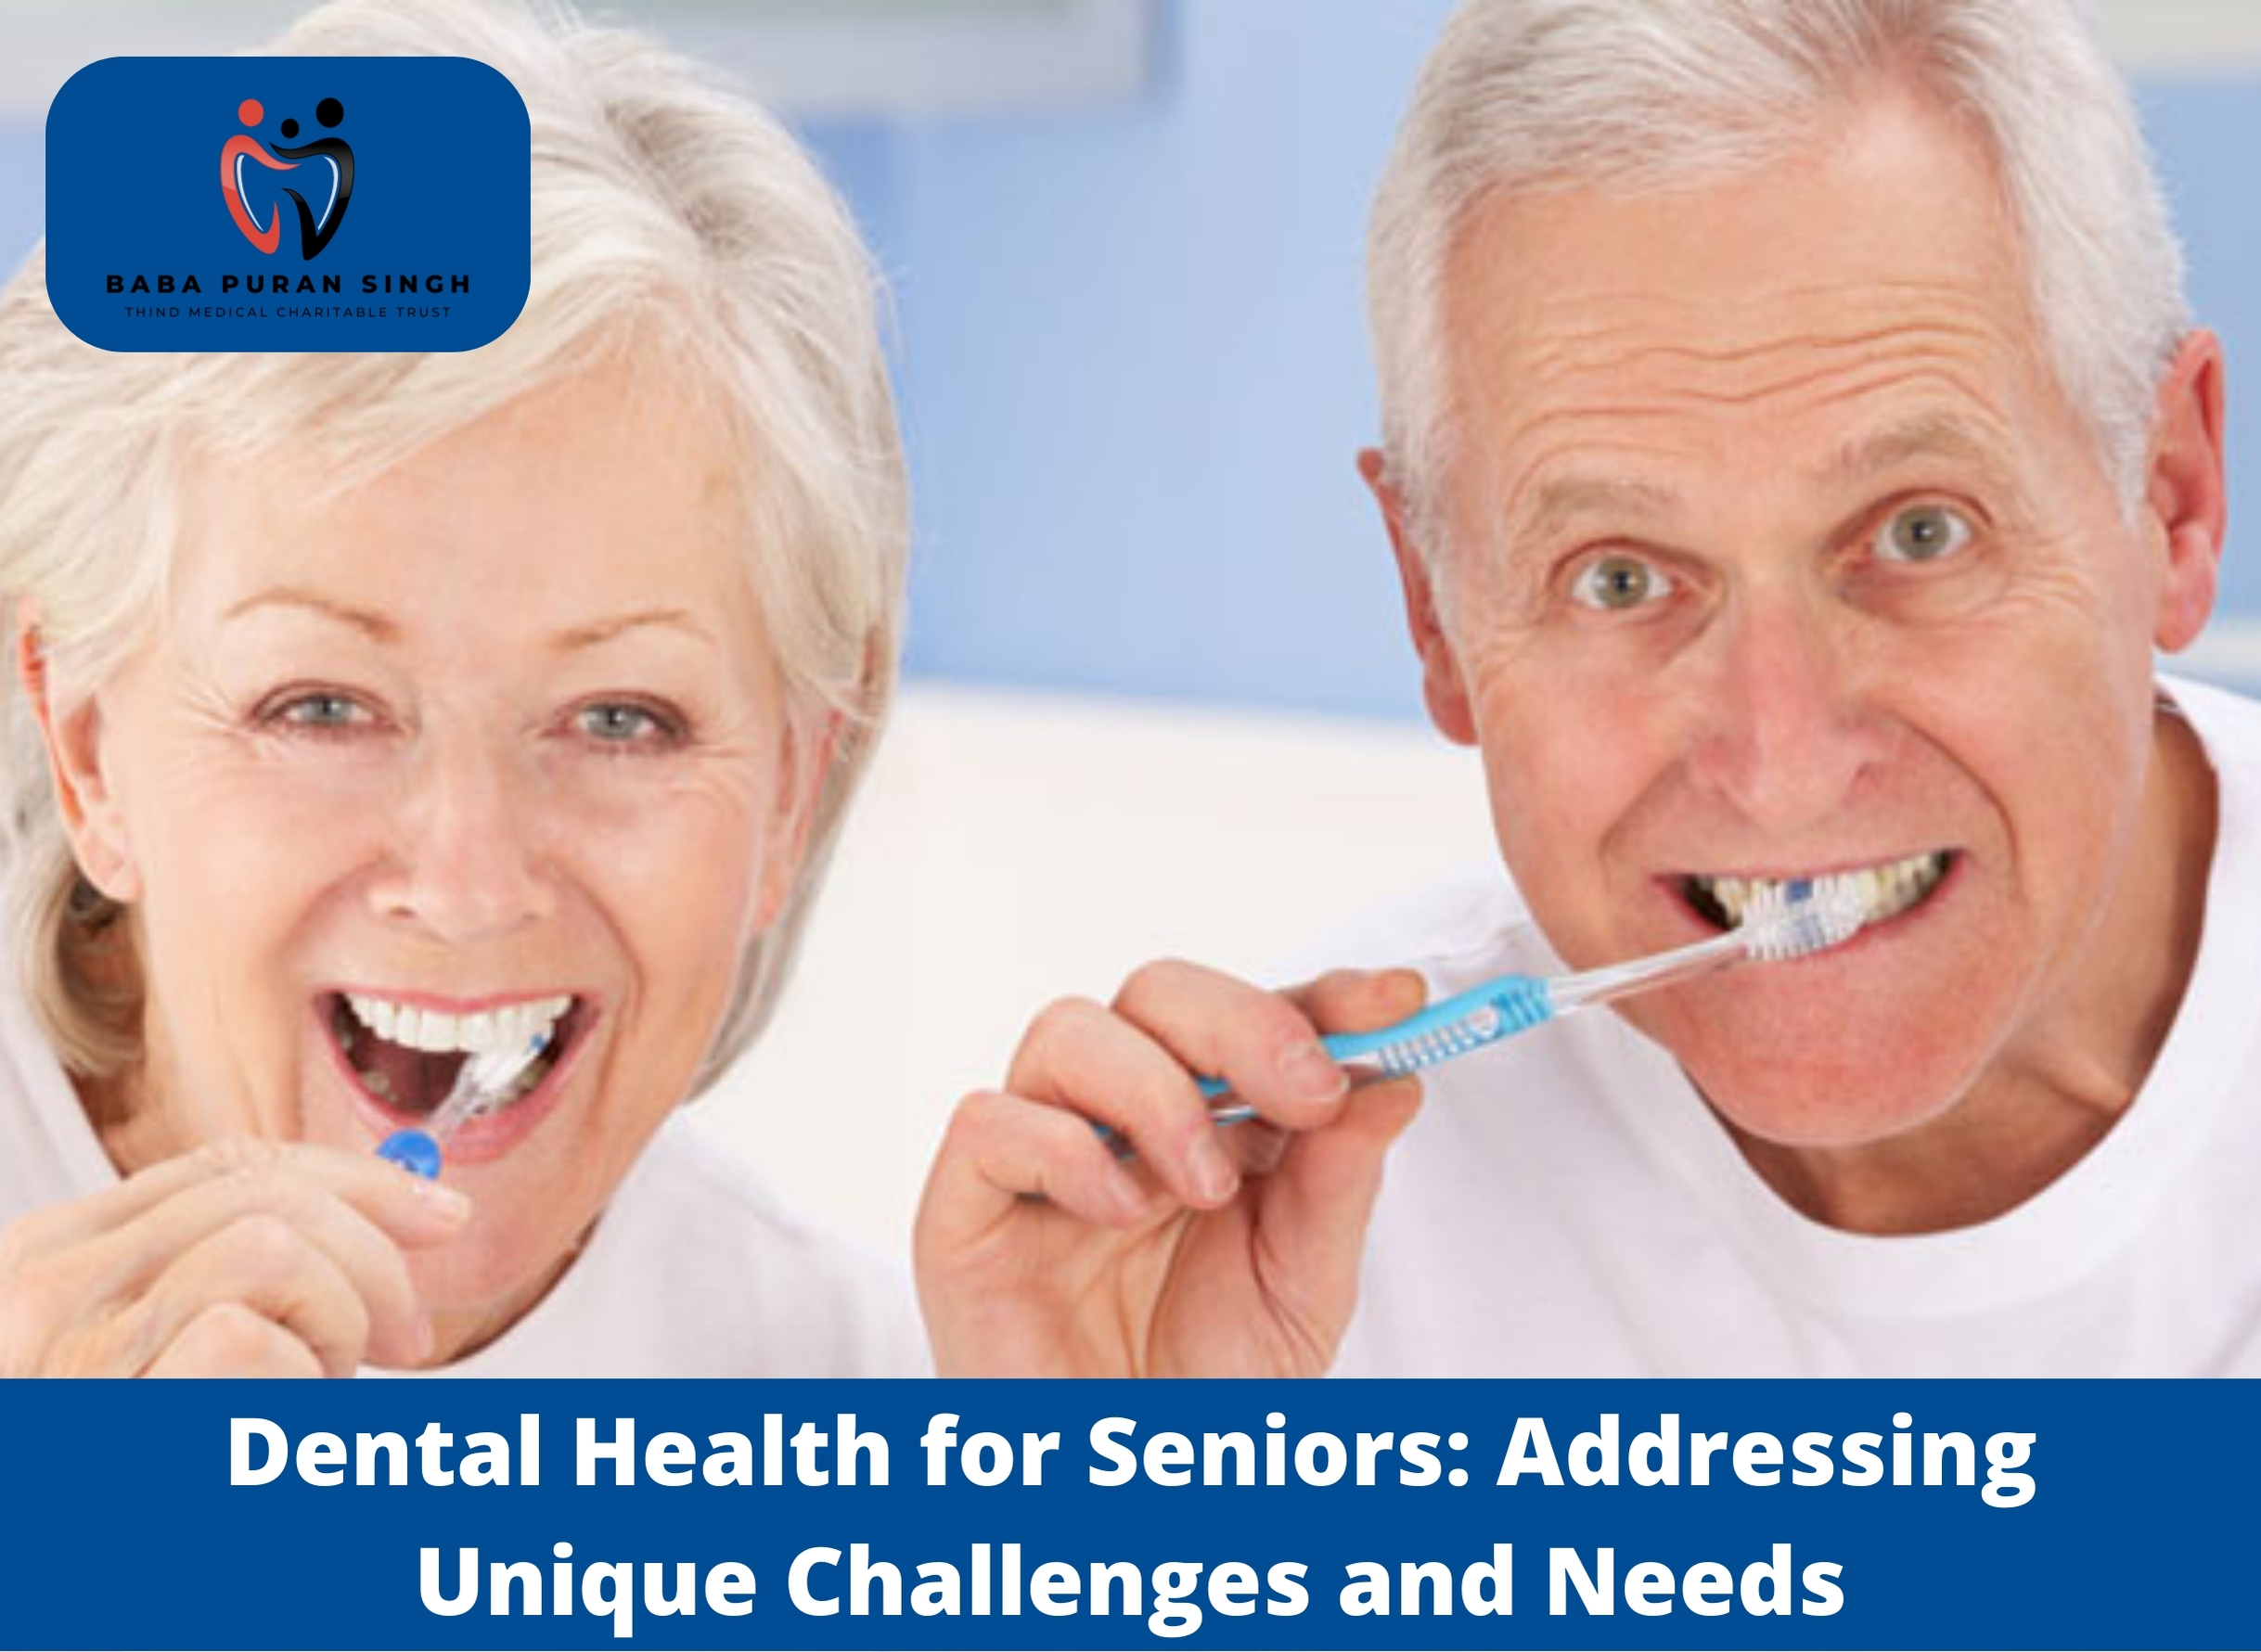 Dental Health for Seniors: Addressing Unique Challenges and Needs